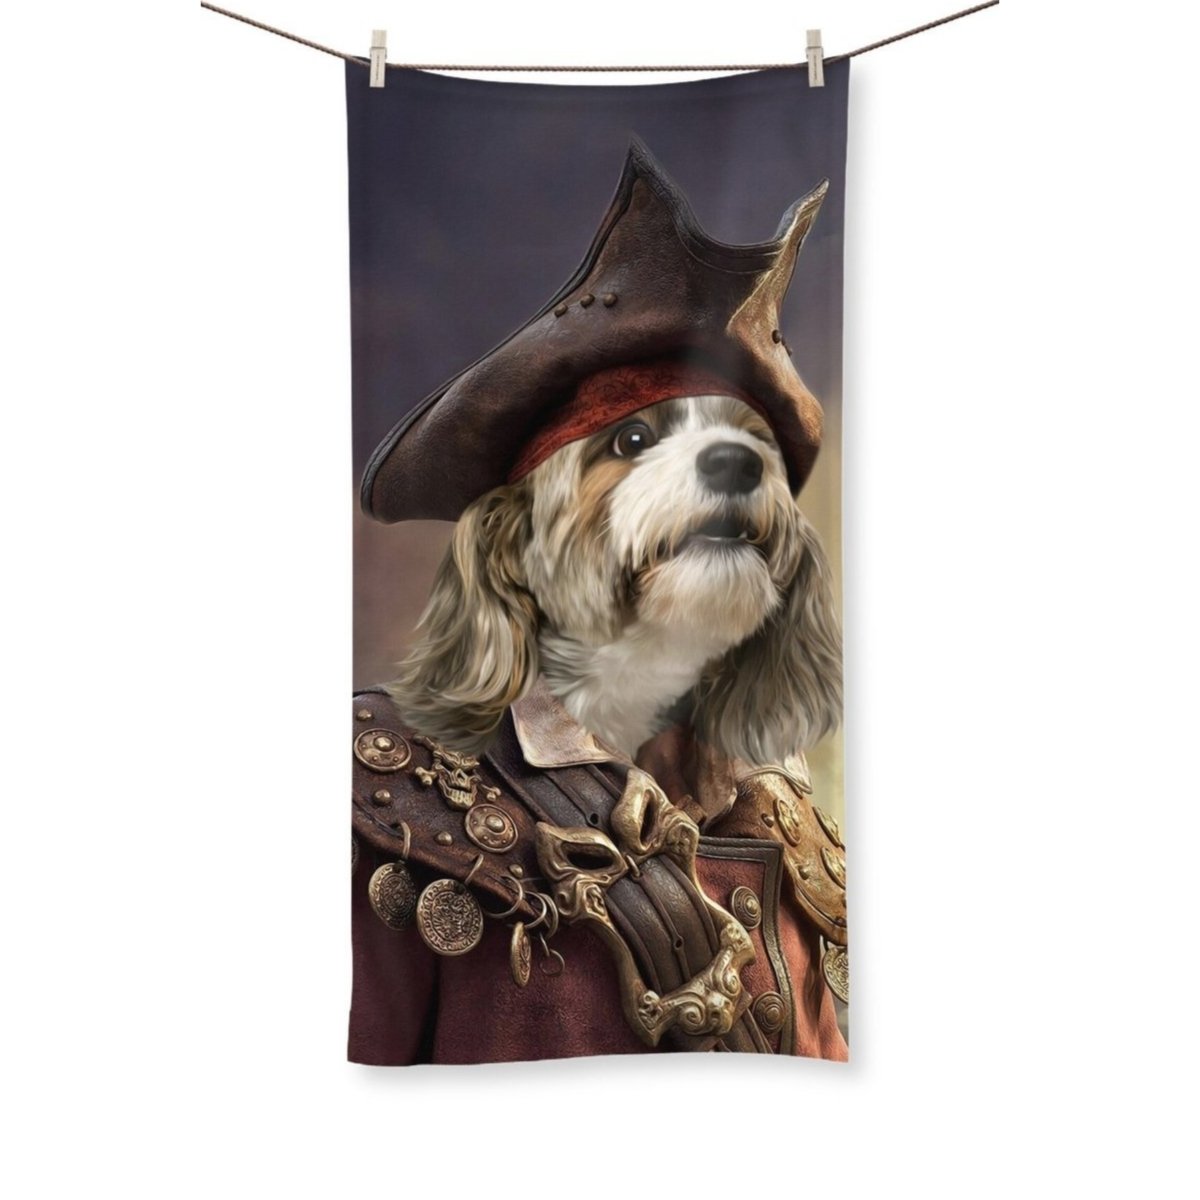 The Pirate: Custom Pet Towel - Paw & Glory - #pet portraits# - #dog portraits# - #pet portraits uk#Paw & Glory, paw and glory, cat picture painting, dog portrait painting, painting of your dog, professional pet photos, dog portraits colorful, best dog artists, pet portraits,custom pet portrait Towel